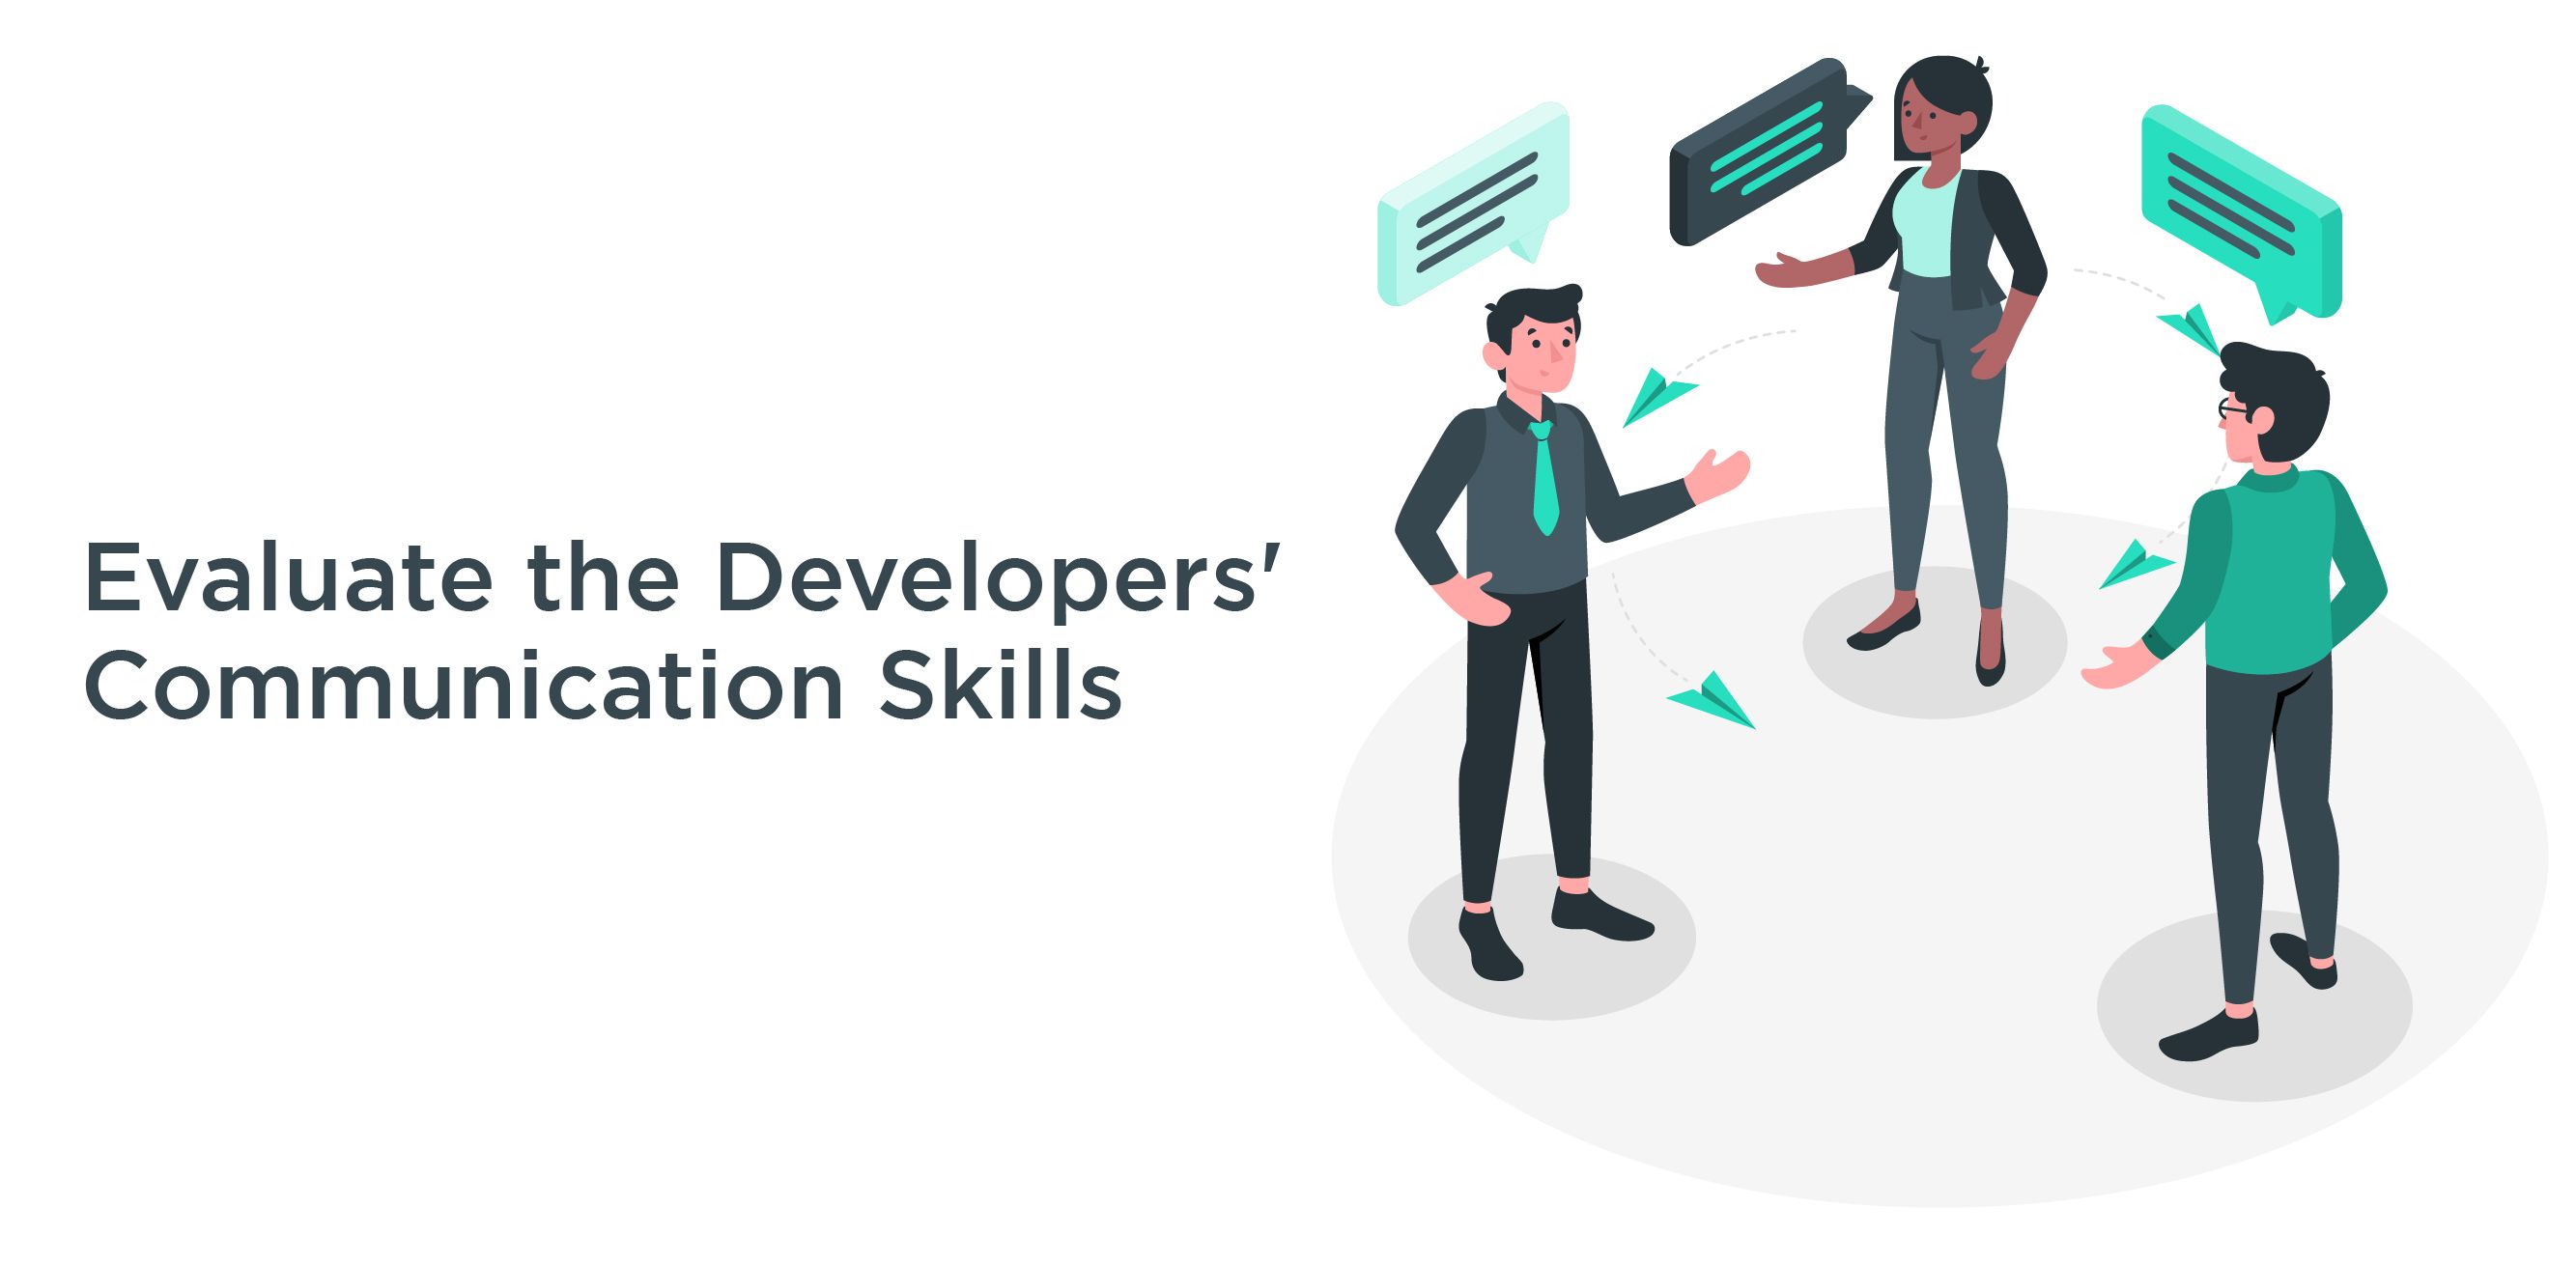 Evaluate the Developers' Communication Skills